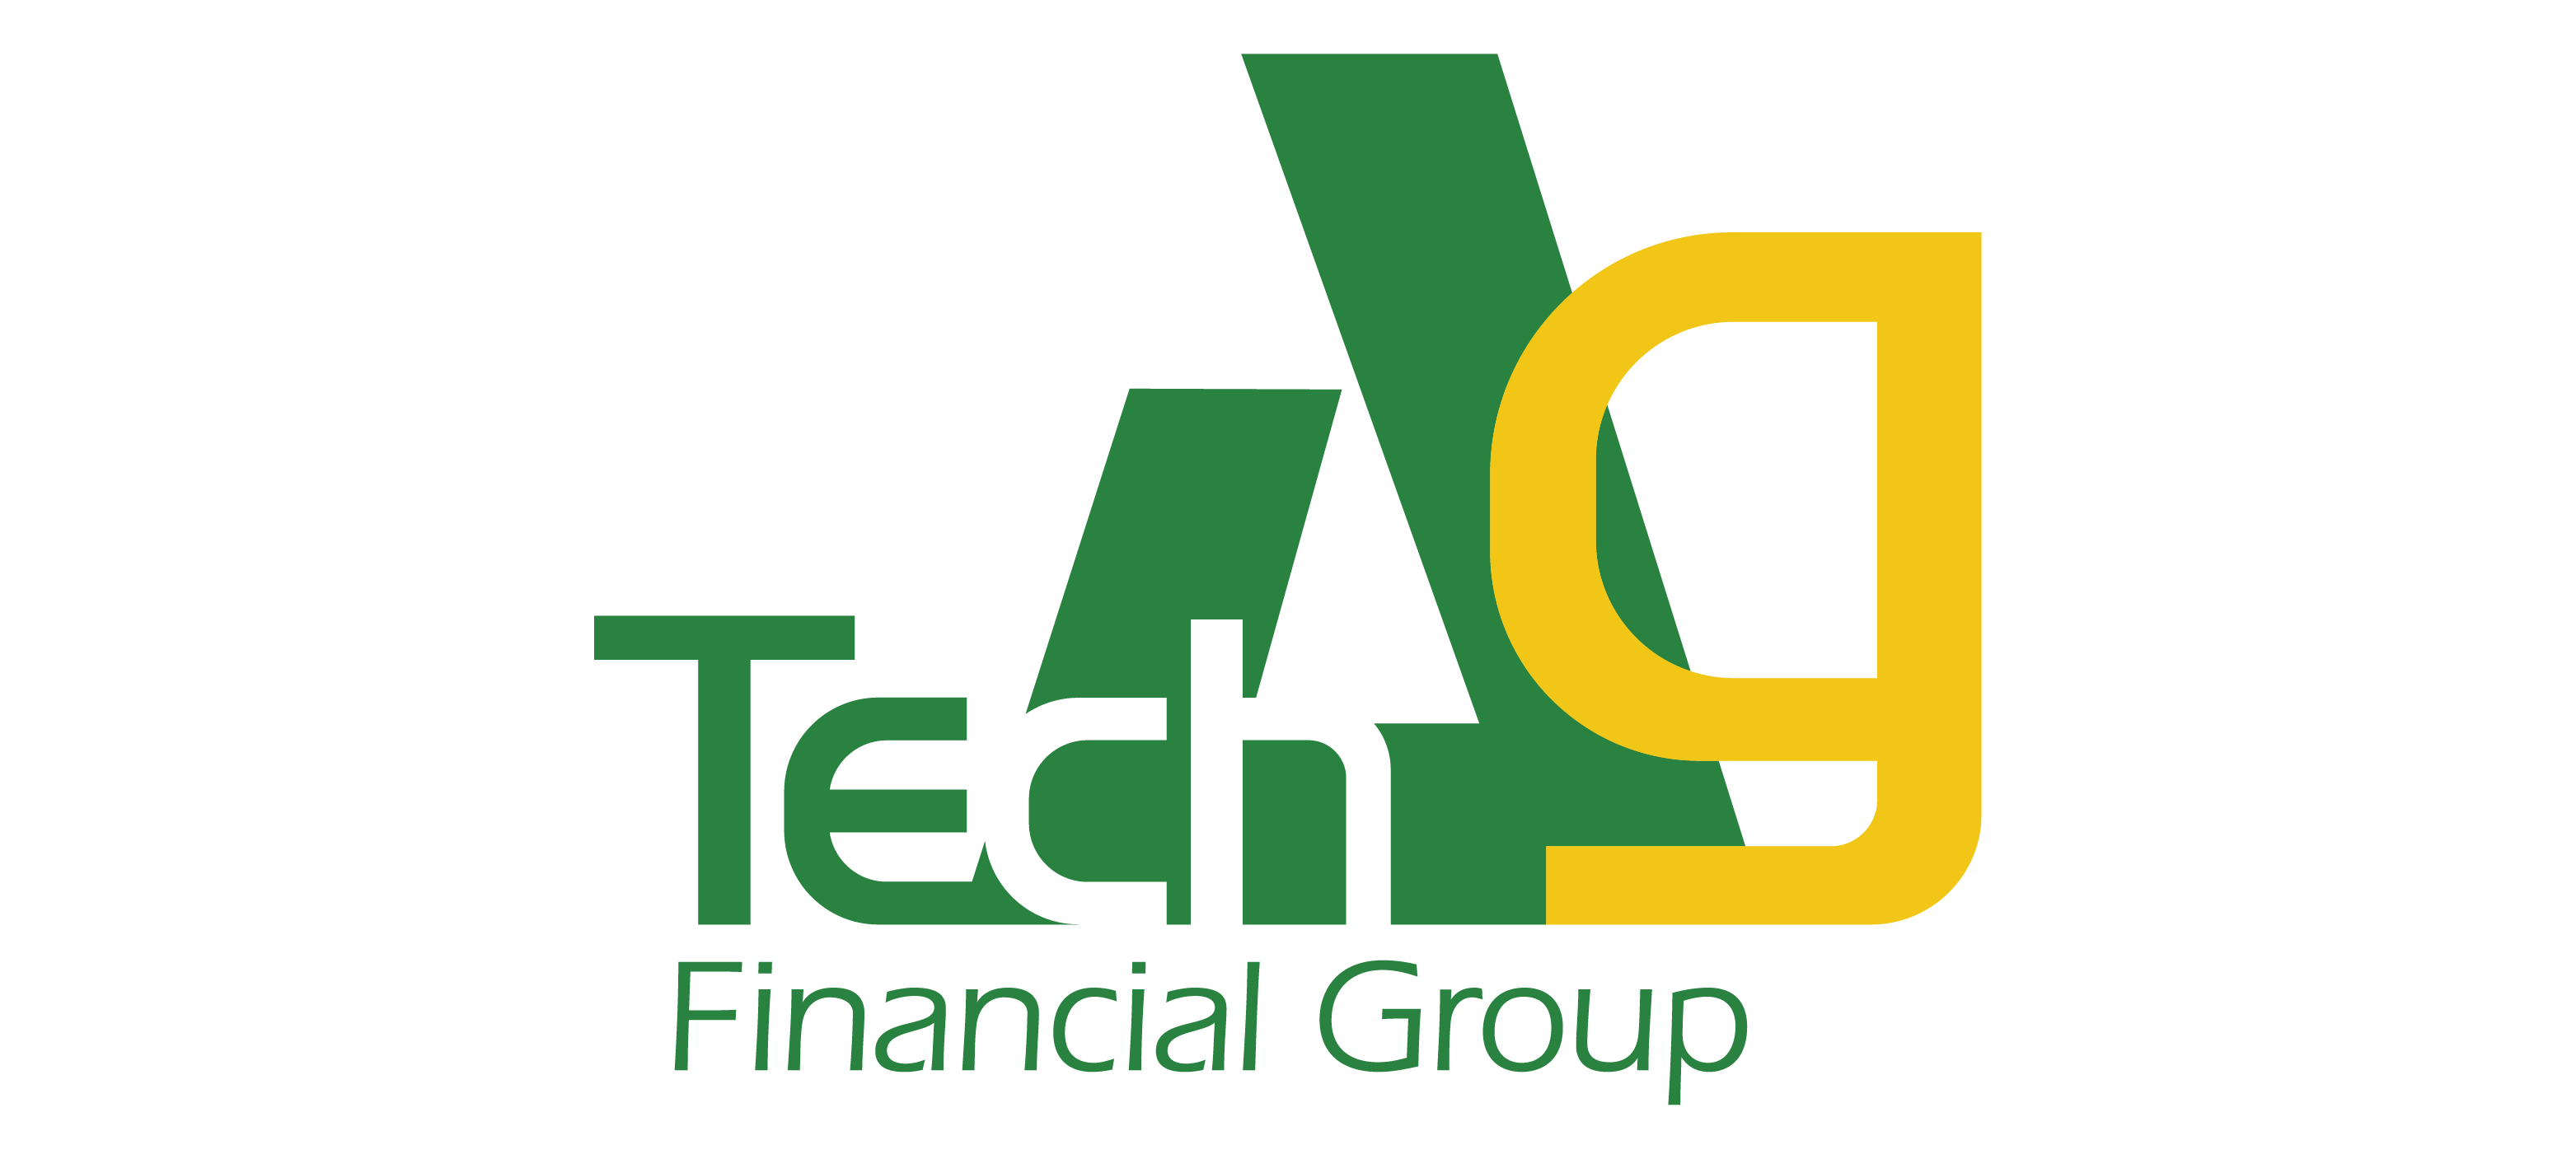 Tech Ag Financial Group Logo. Green T and E. Transparent C and H in front of a large green A and yellow G. Financial Group listed in green below.